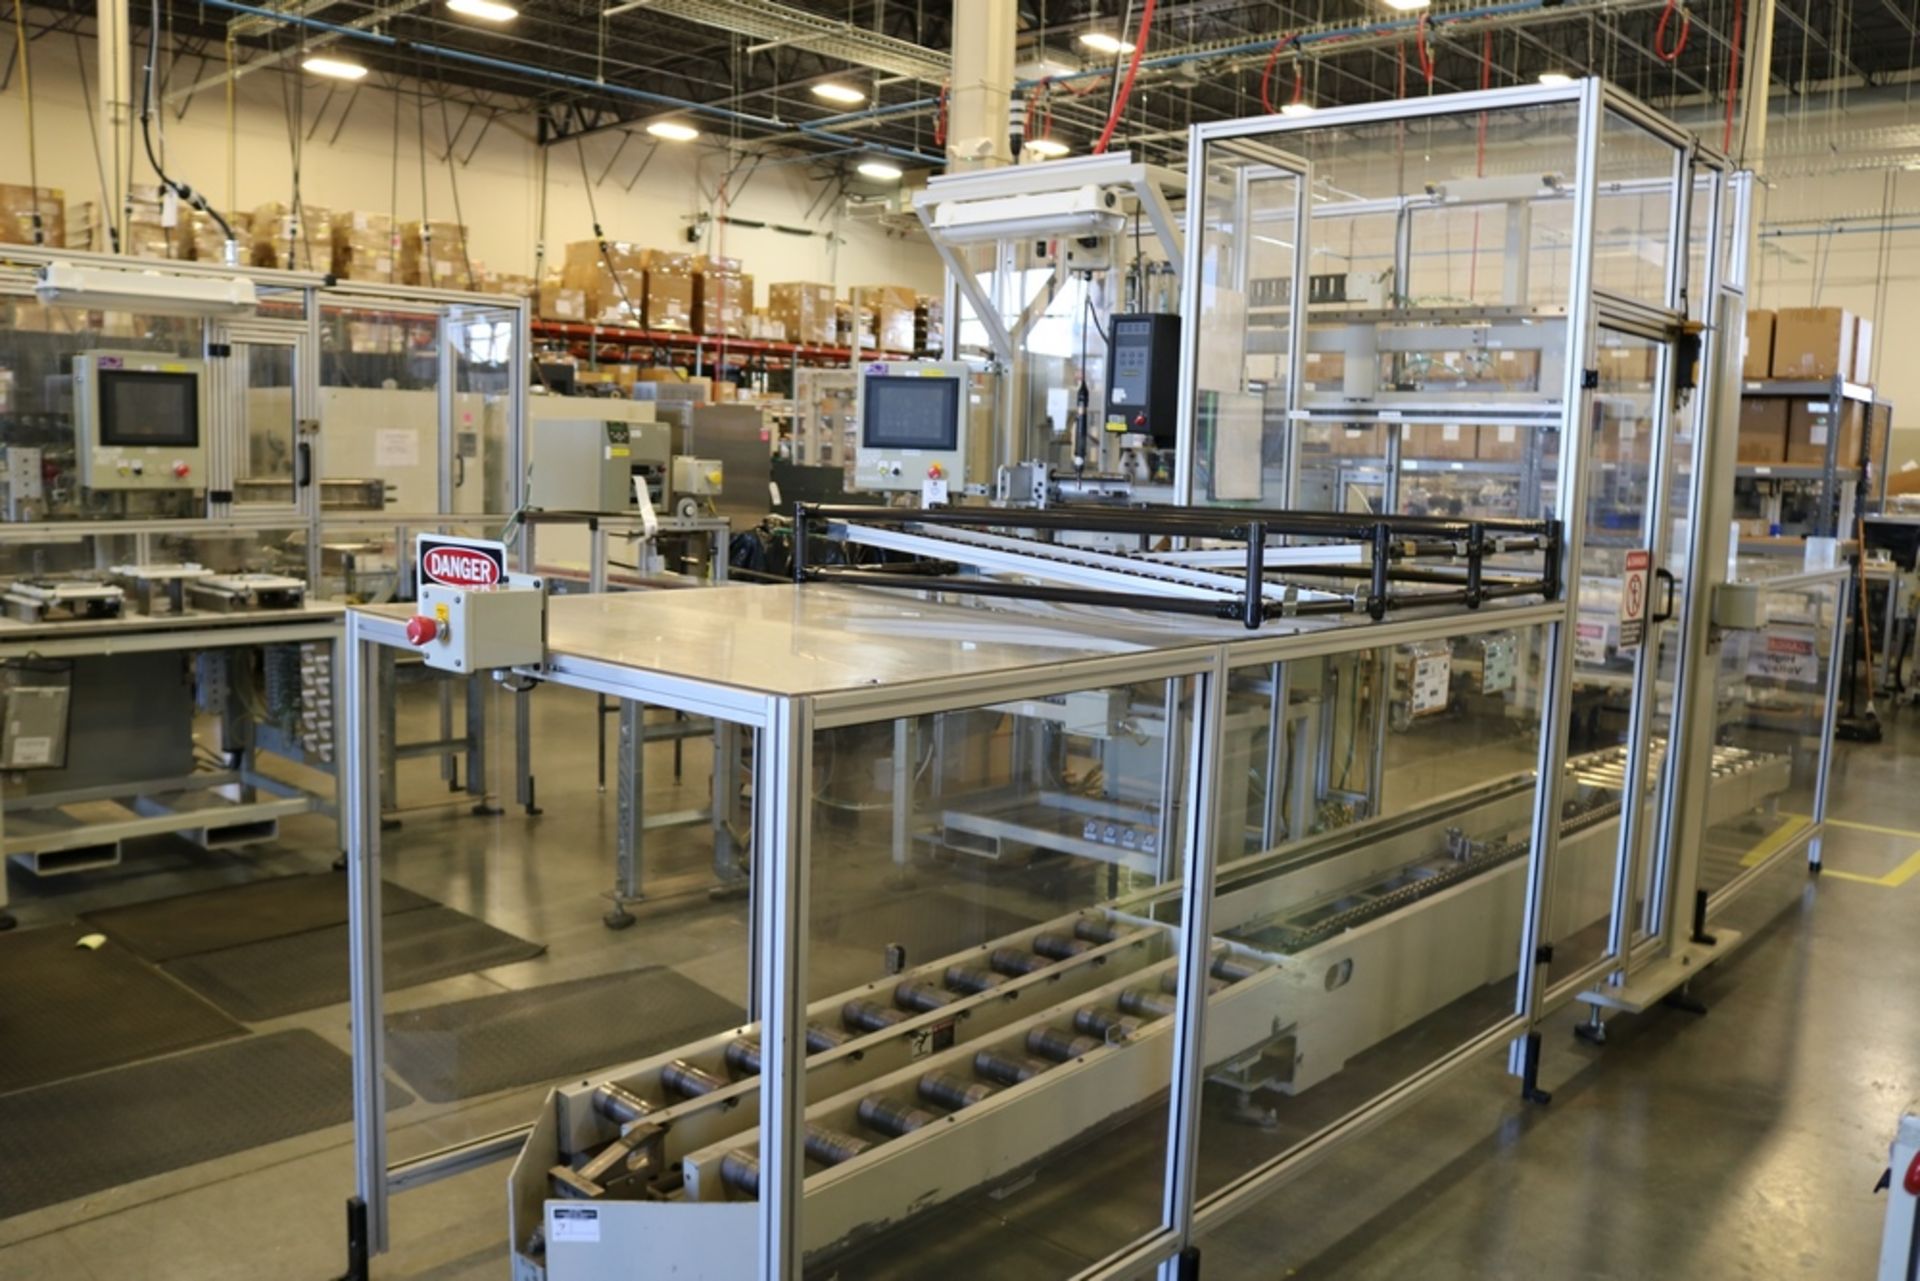 3 Station Automated Module Assembly Line Built by Pro Tech Machine for Enerdel Module Assembly - Image 36 of 48